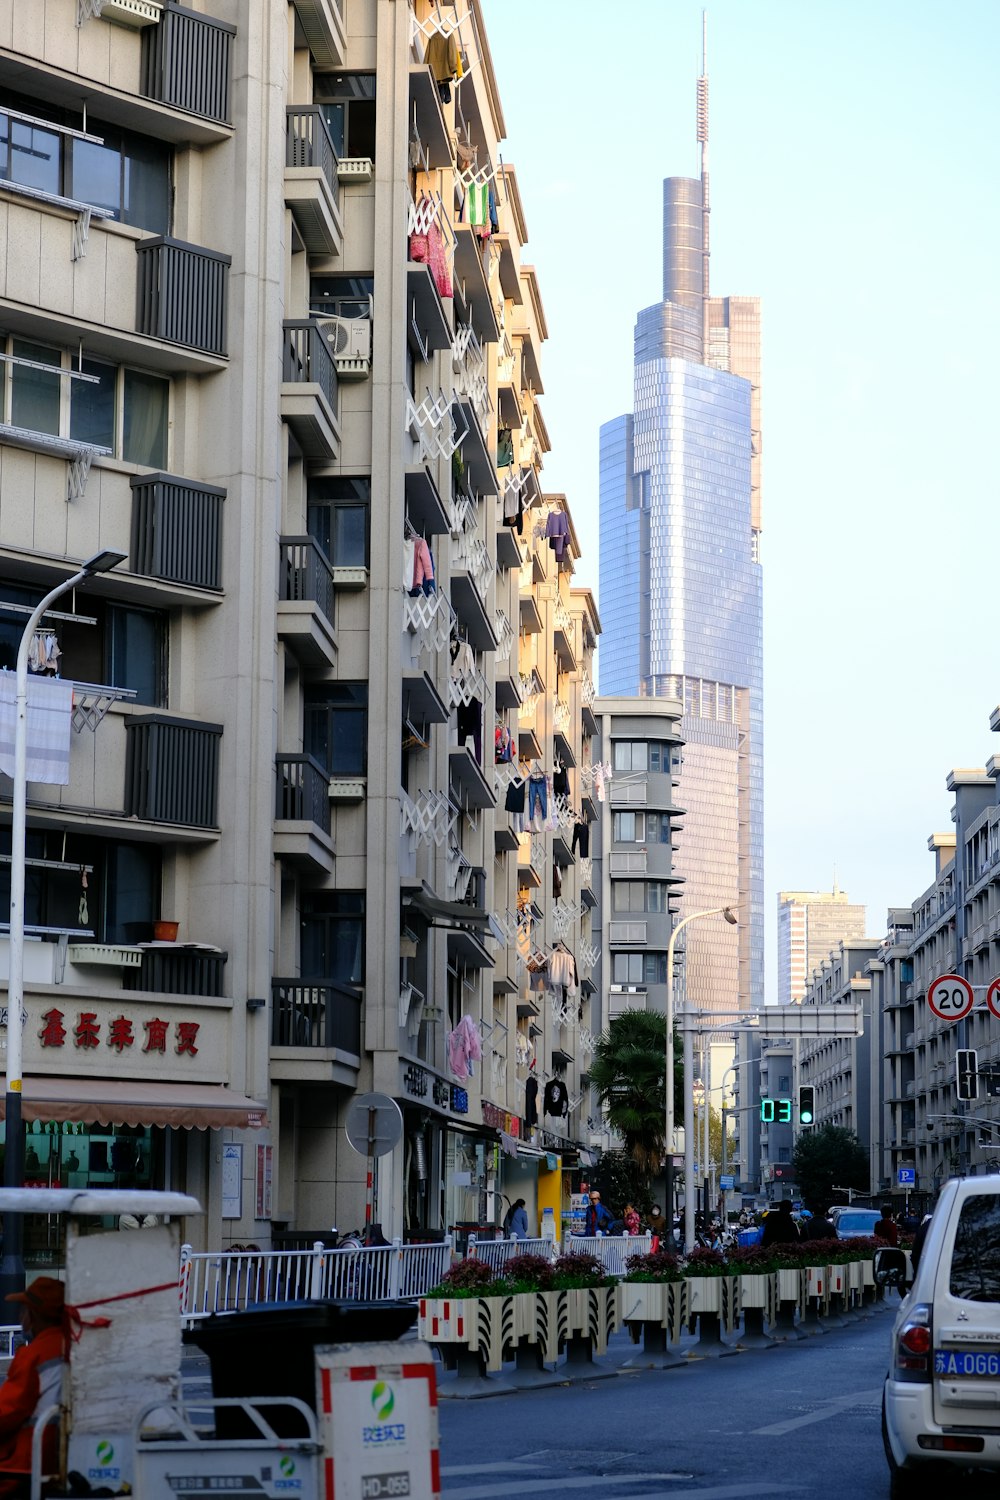 a city street lined with tall buildings with balconies